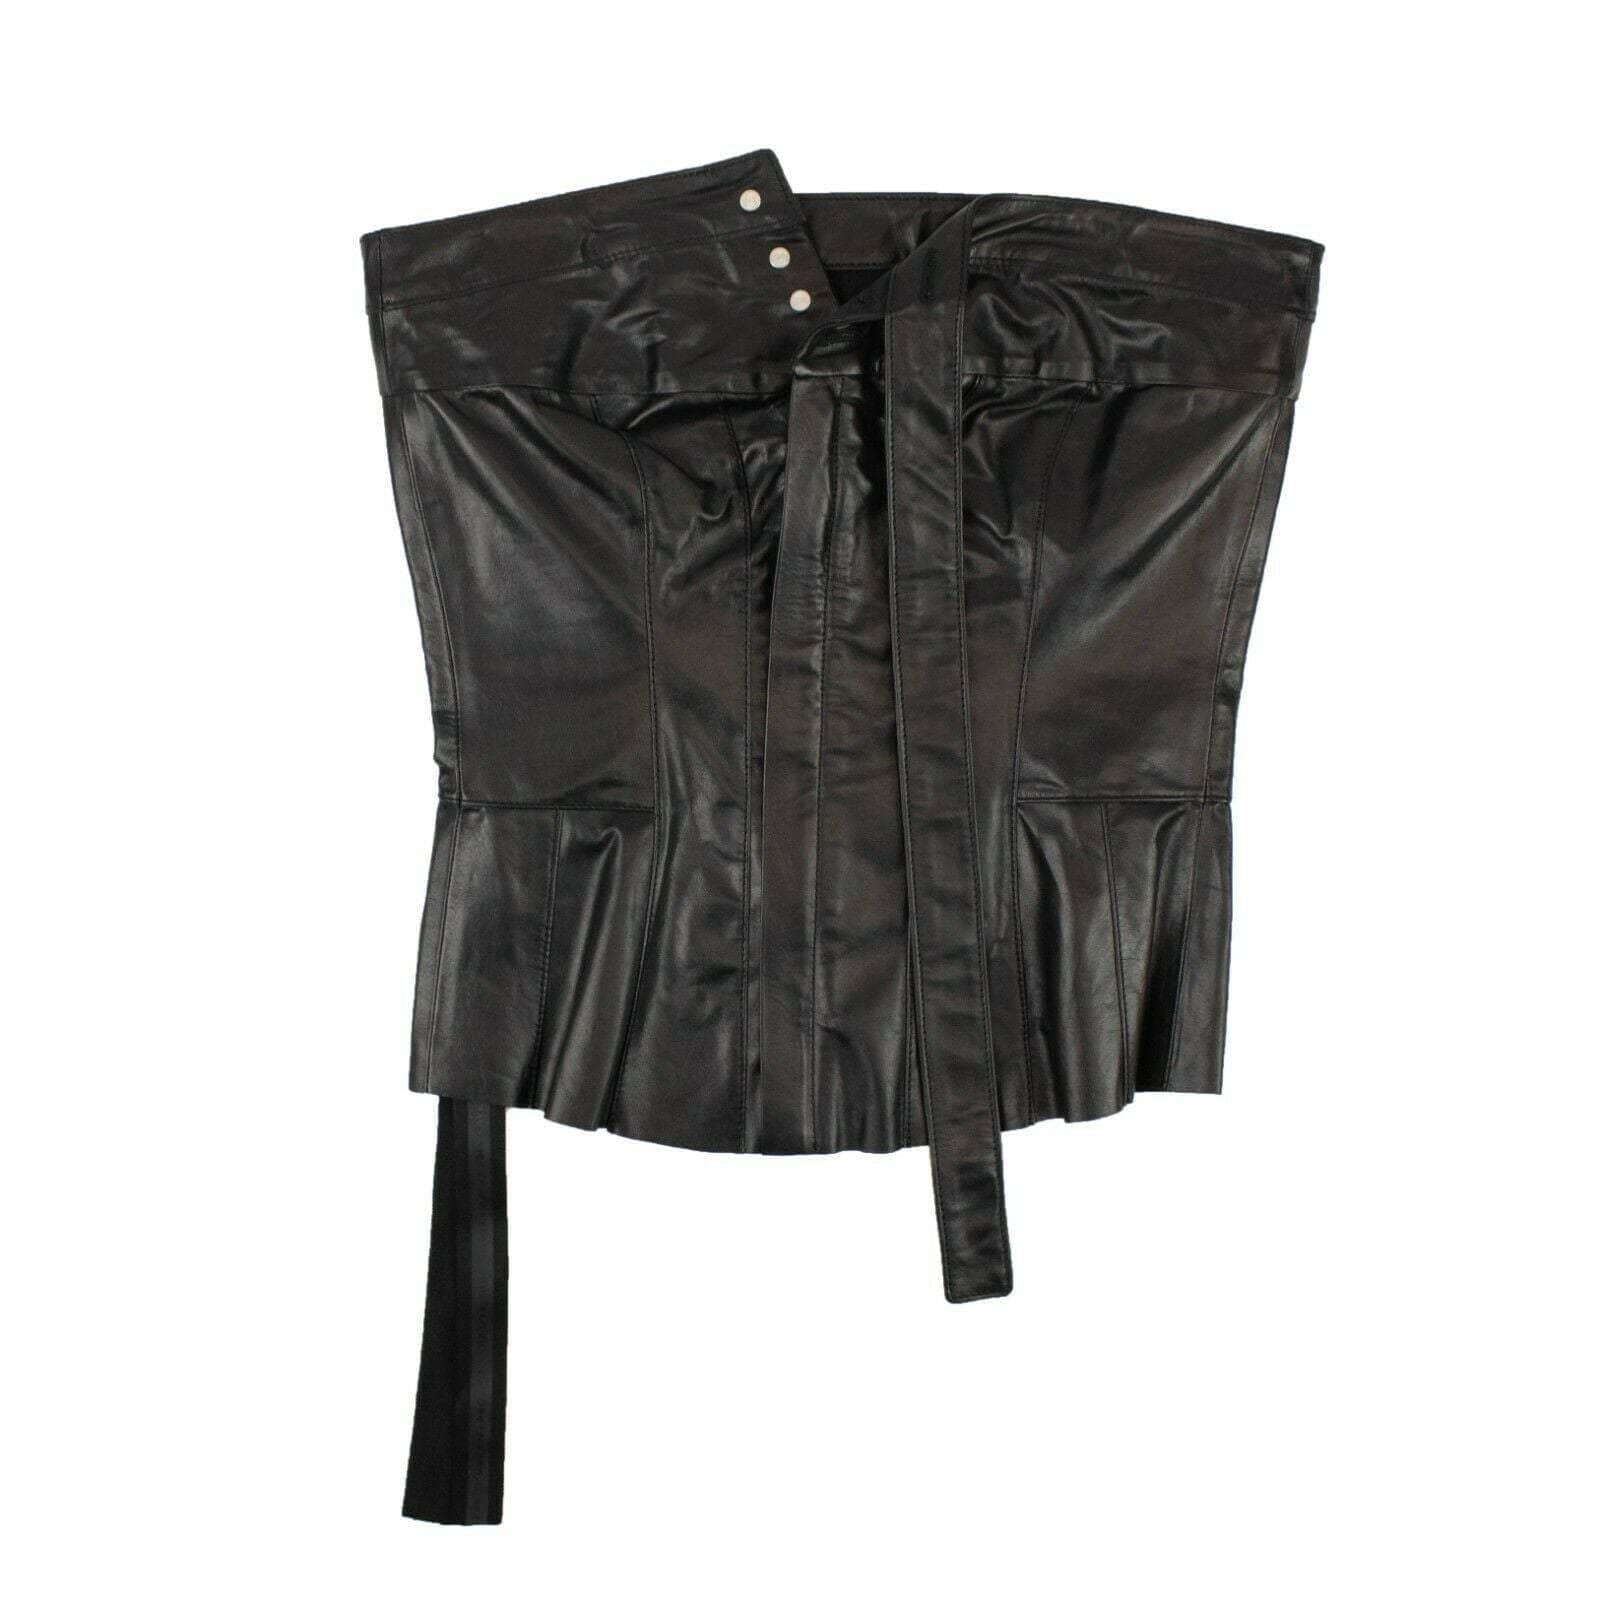 UNRAVEL PROJECT 250-500, channelenable-all, couponcollection, gender-womens, main-clothing, sale-enable, size-m, size-s, unravel-project, womens-crop-tops S Black Leather Corset Top 82NGG-UN-1185/S 82NGG-UN-1185/S